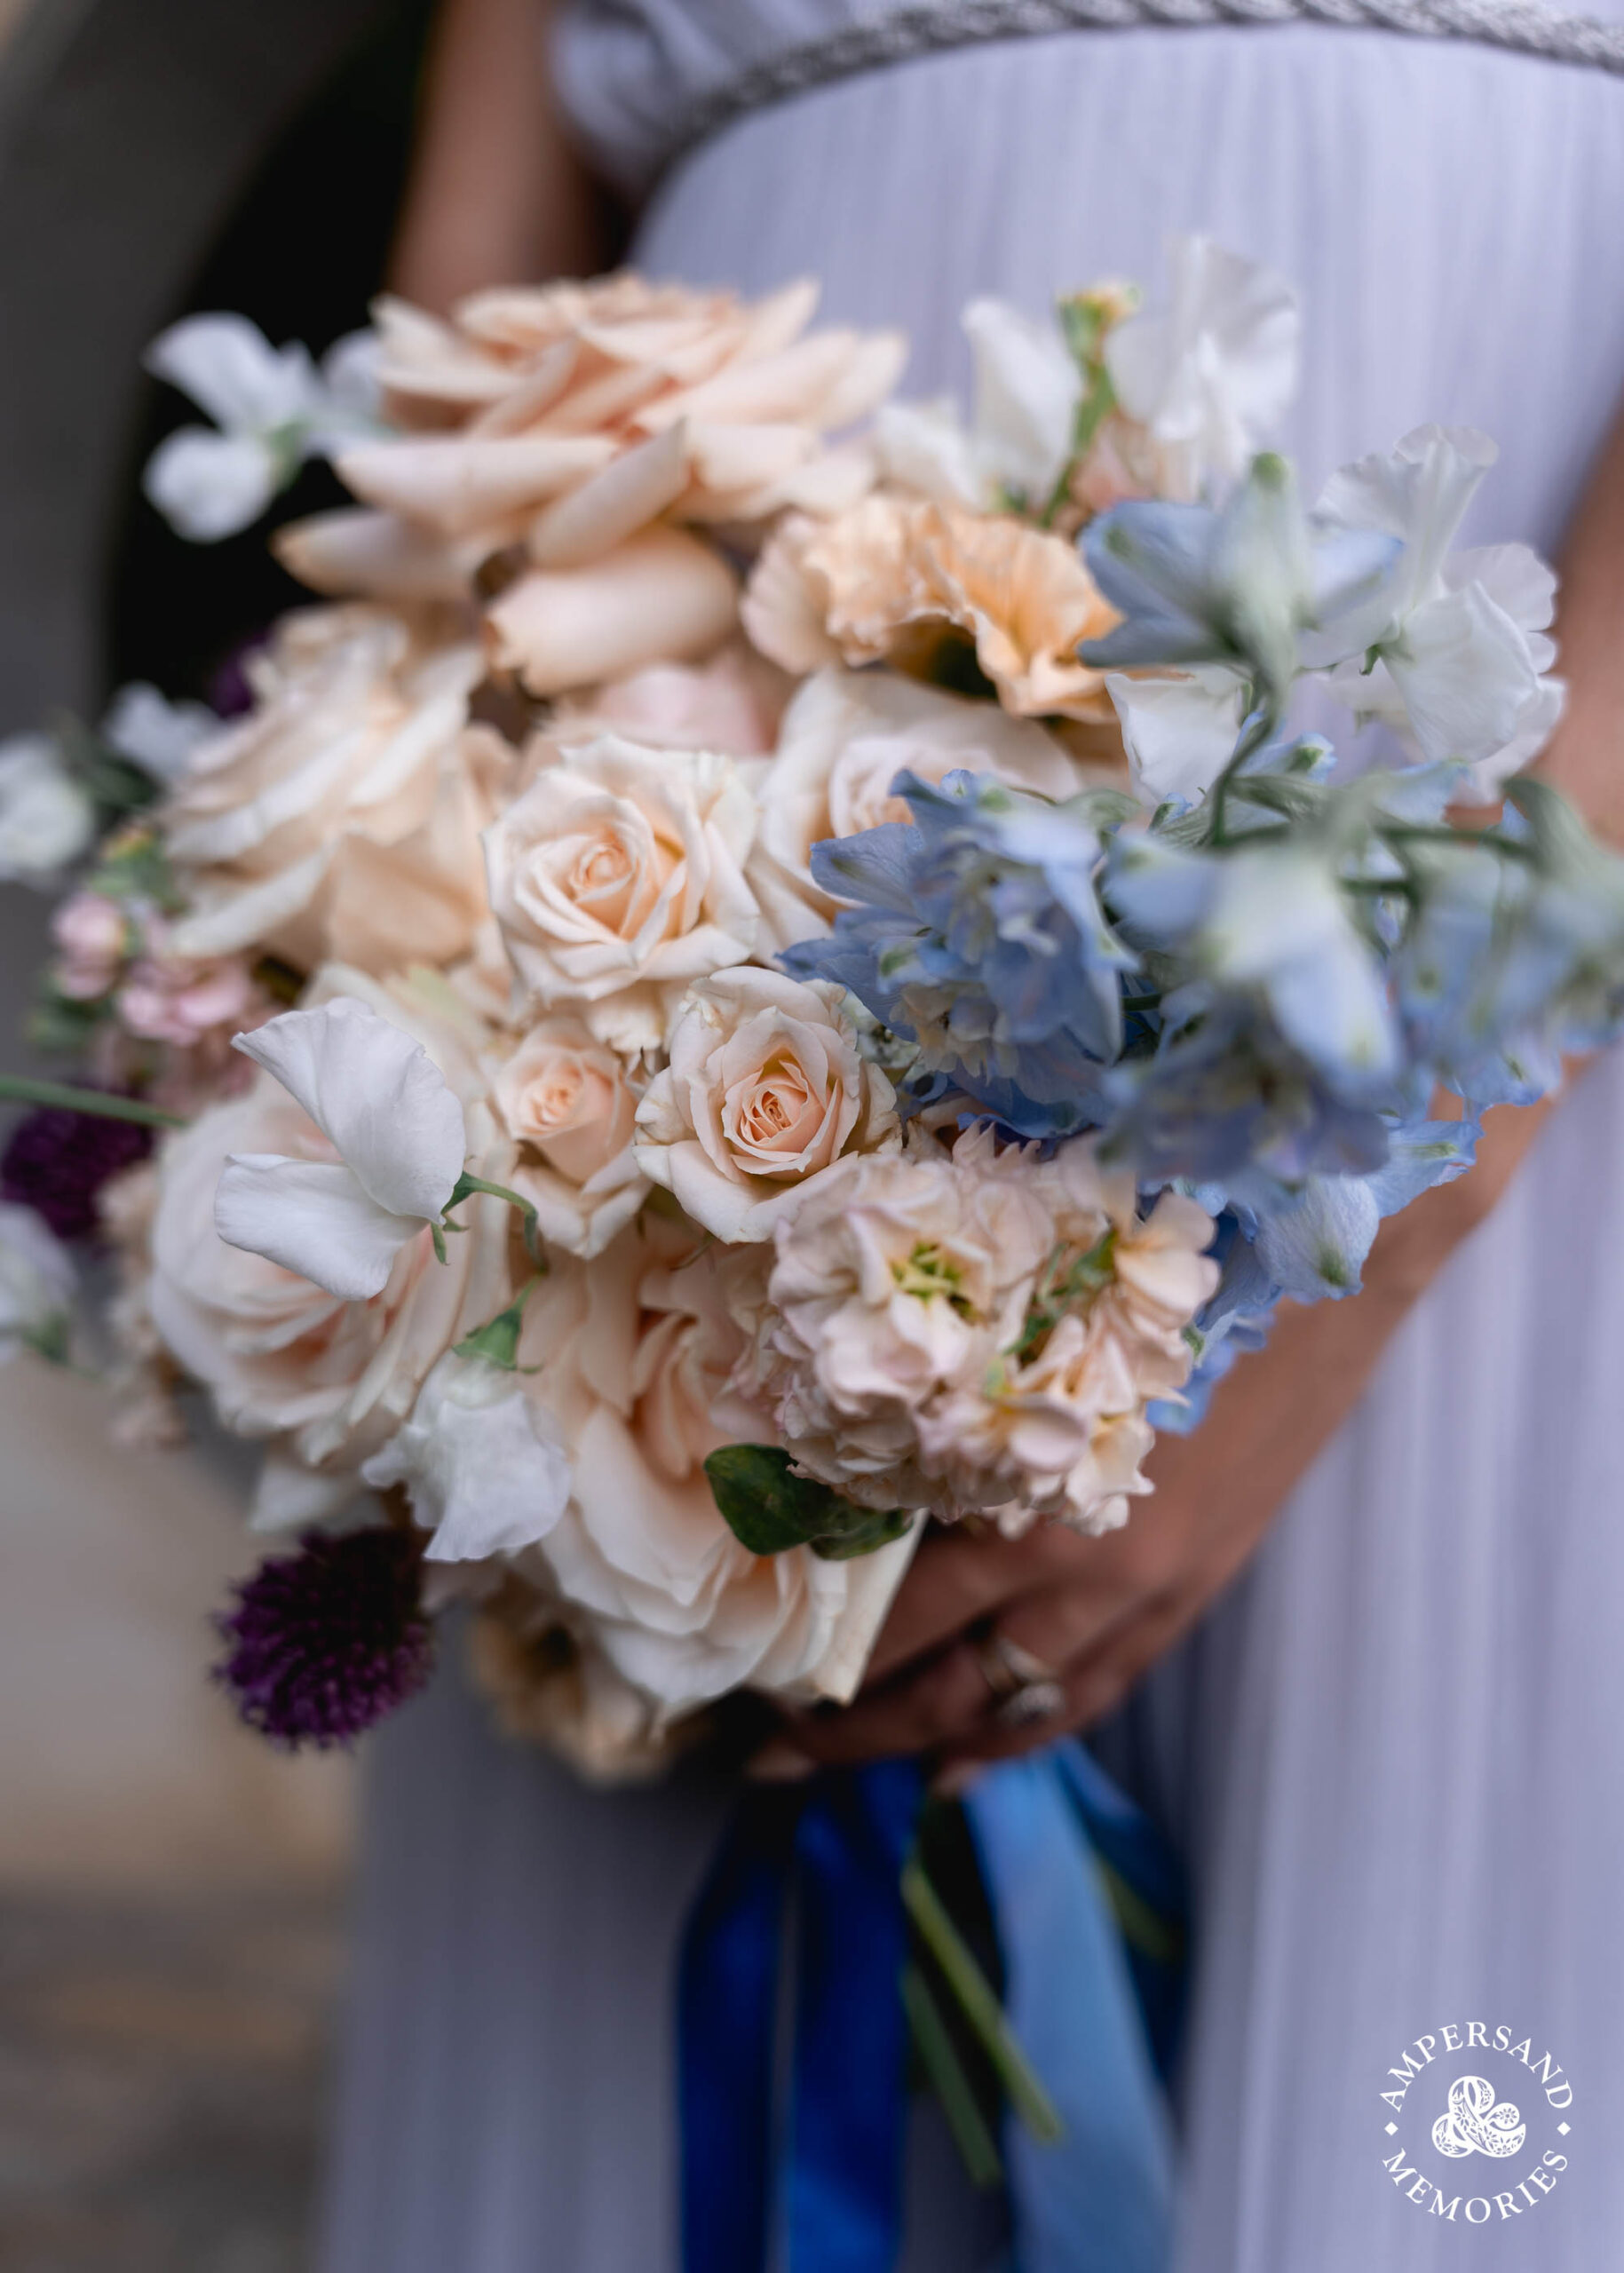 A peach bouquet with blue delphiniums and a blue ribbon